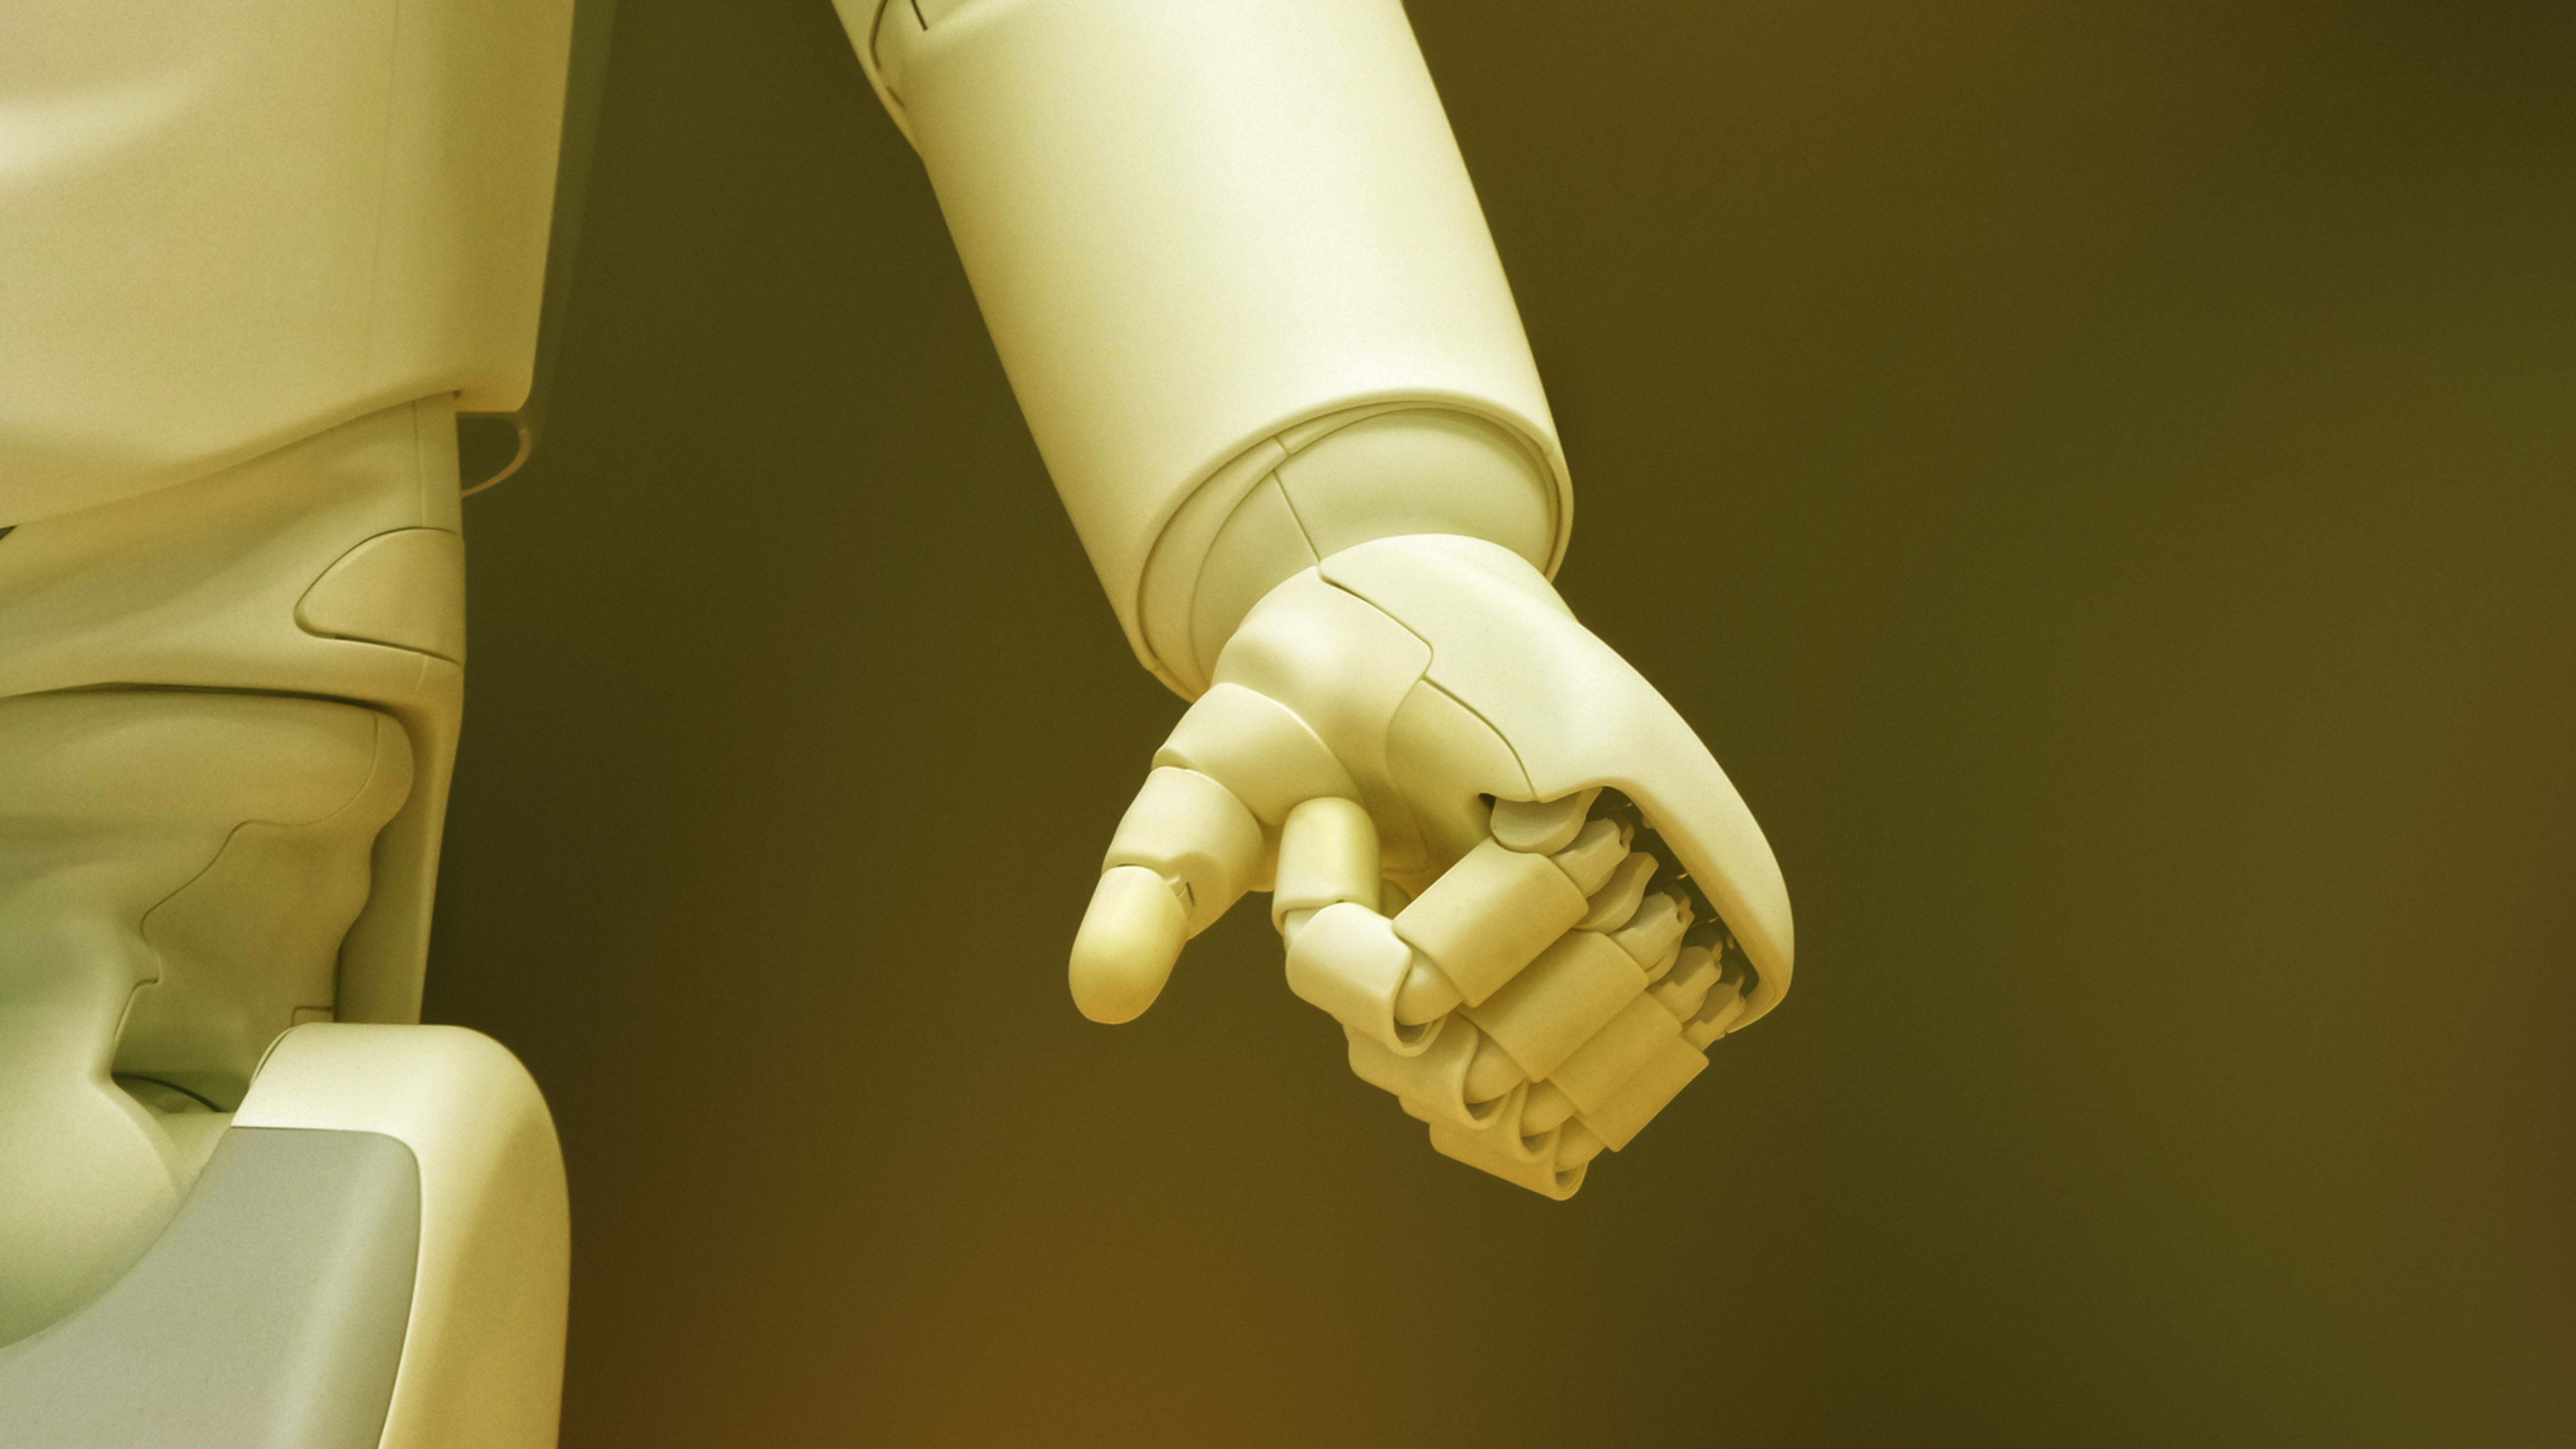 4 sobering predictions about the future of jobs in an automated world